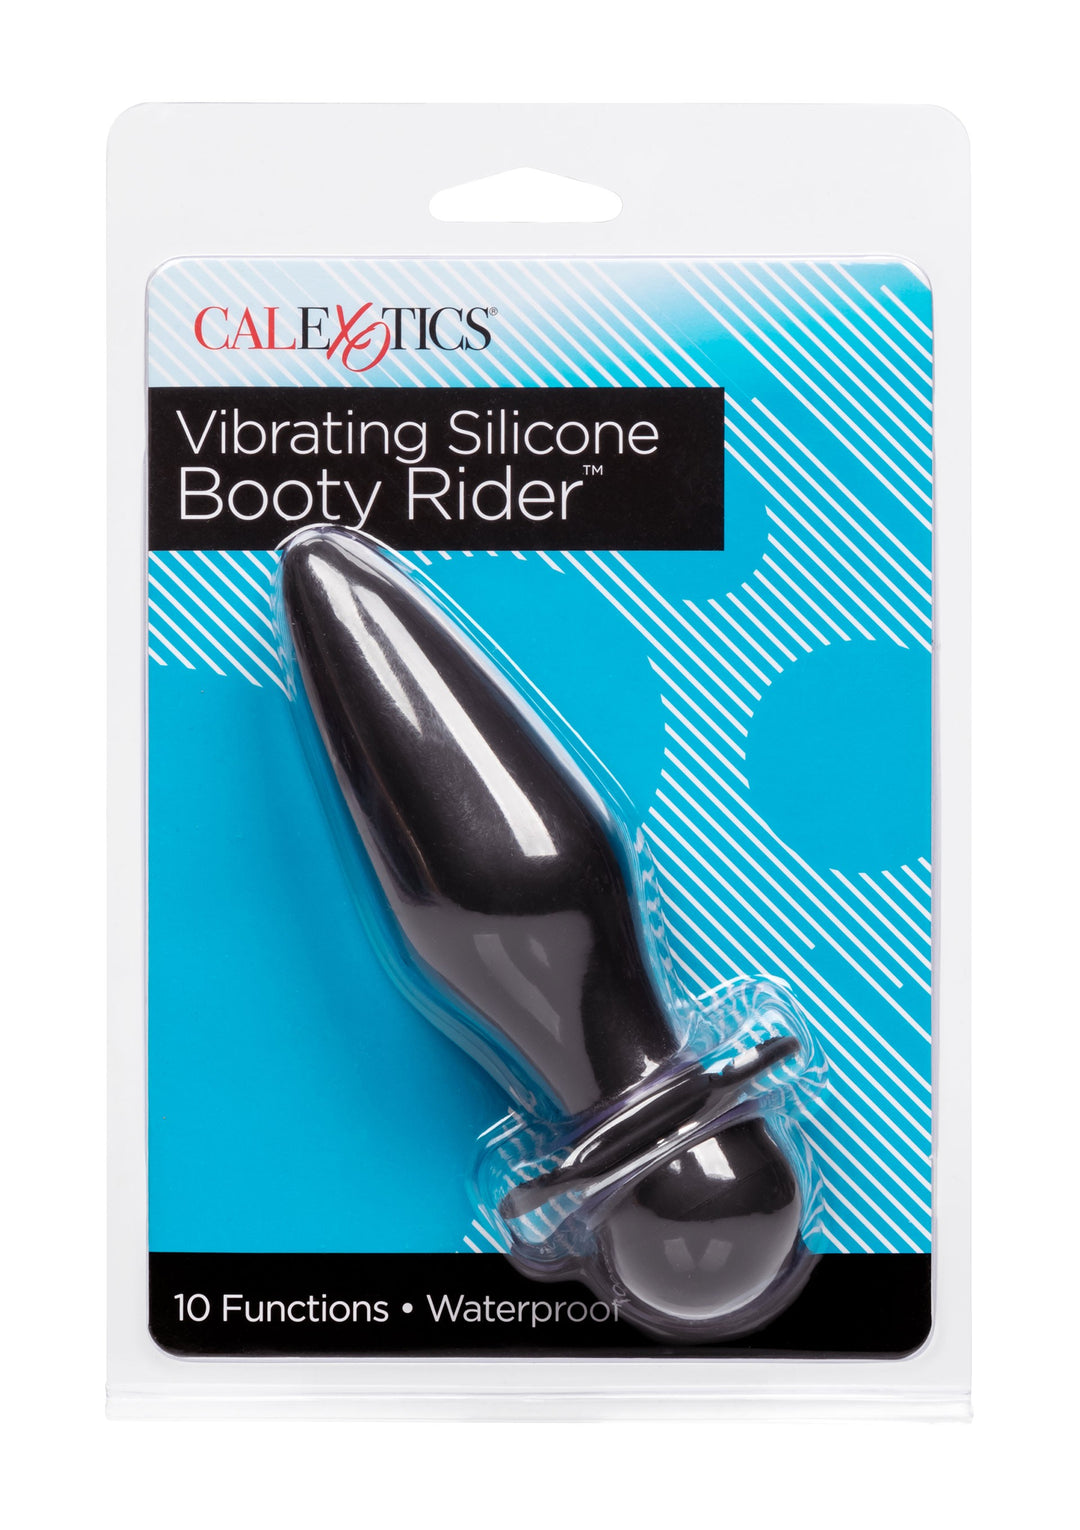 Vibrating Silicone Booty Rider anal plug